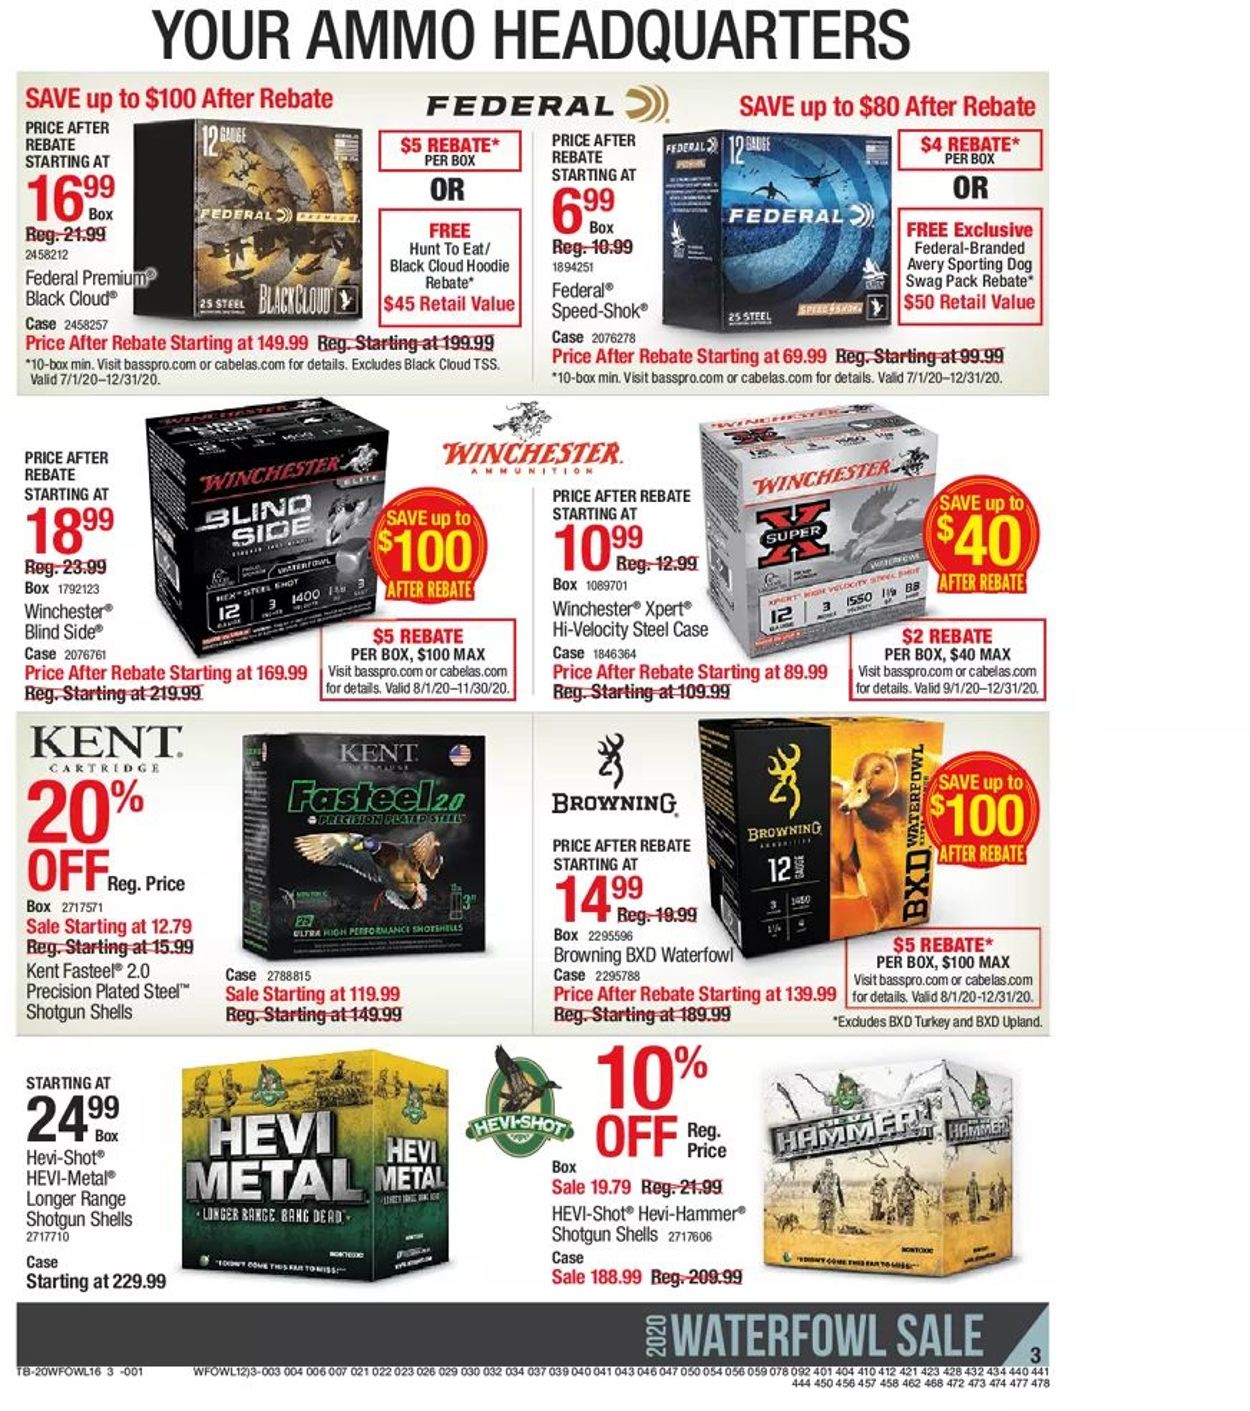 bass-pro-current-weekly-ad-11-19-12-09-2020-3-frequent-ads